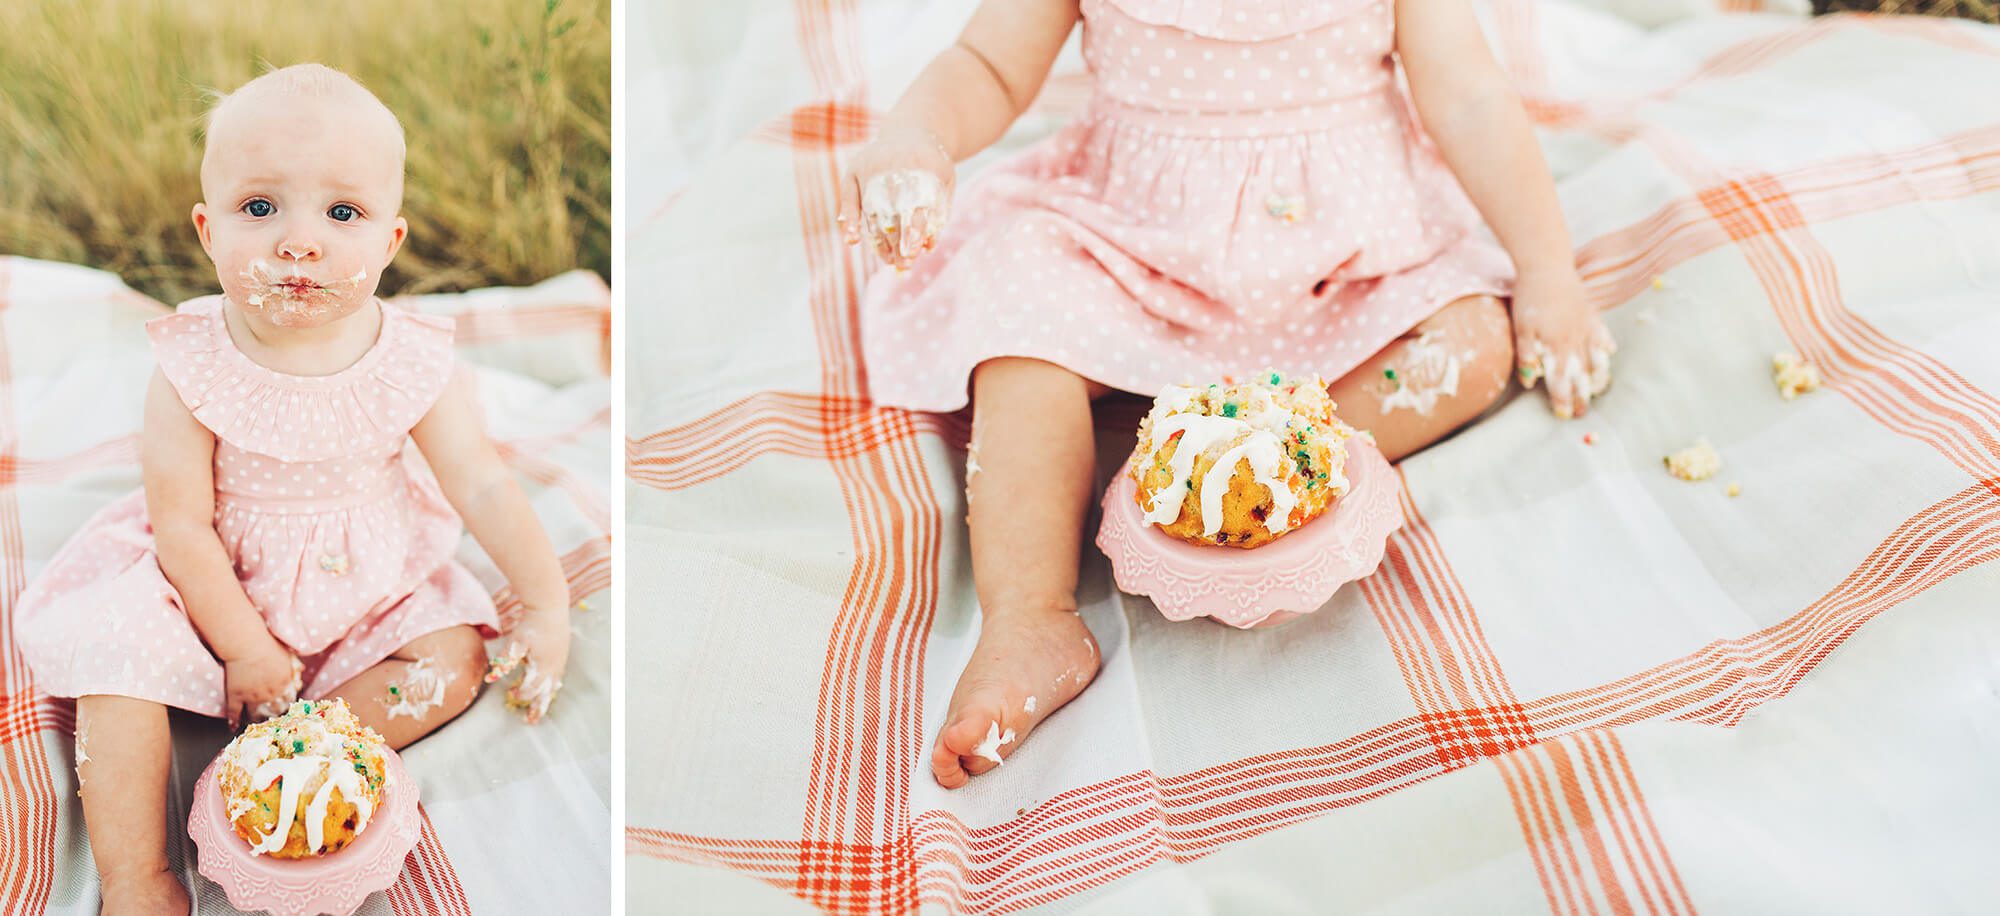 Sticky fingers and toes during this fall cake smash session